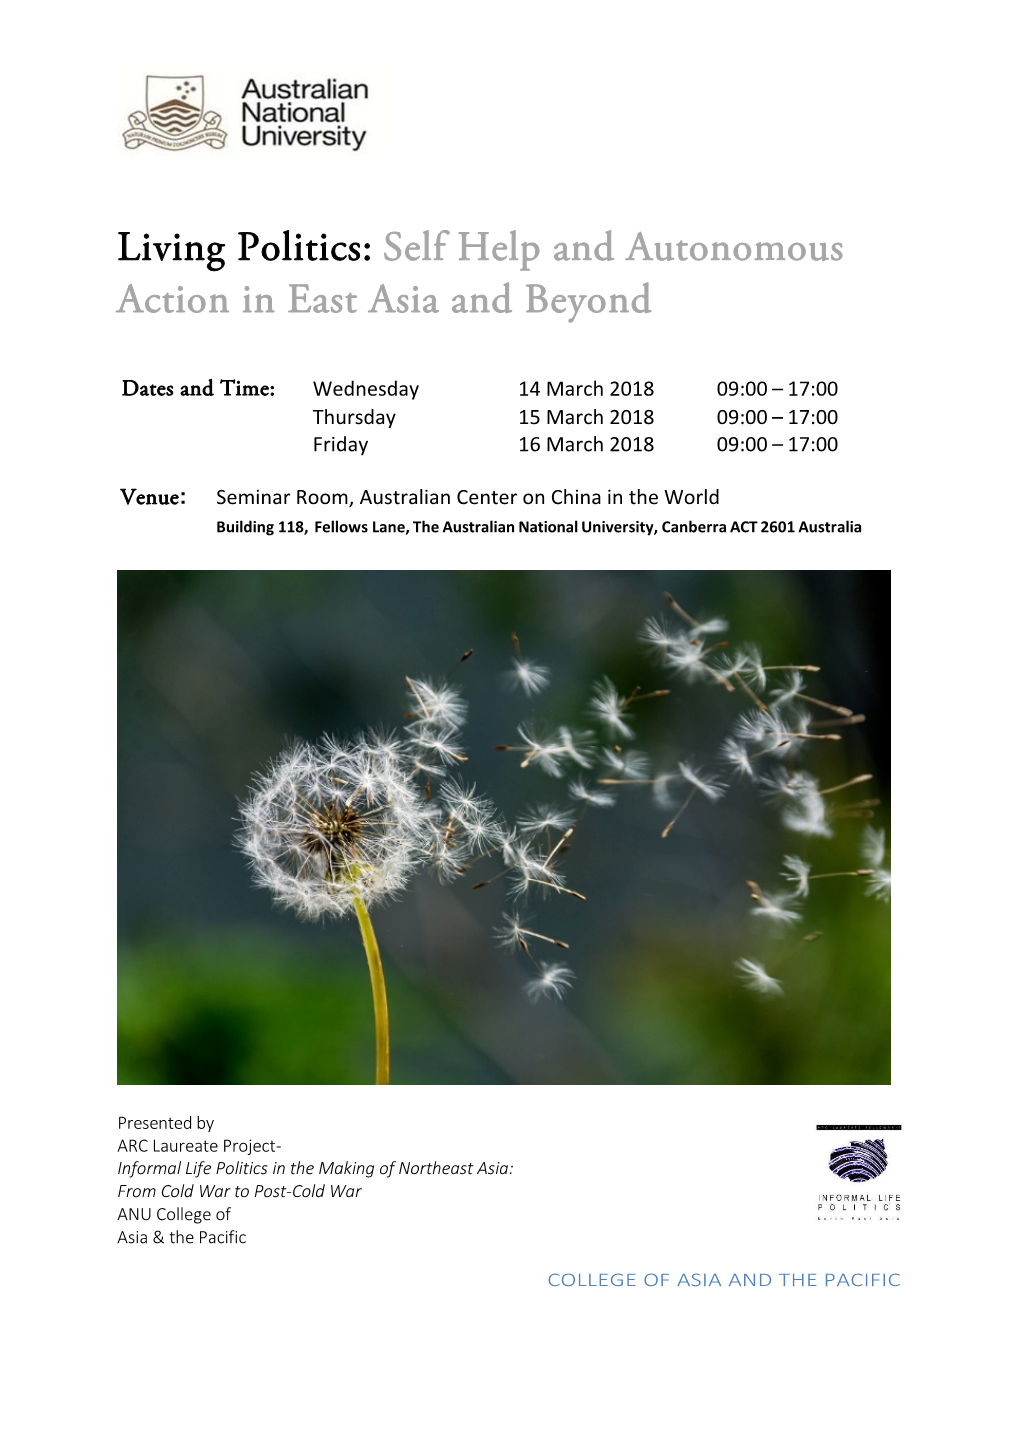 Living Politics: Self Help and Autonomous Action in East Asia and Beyond